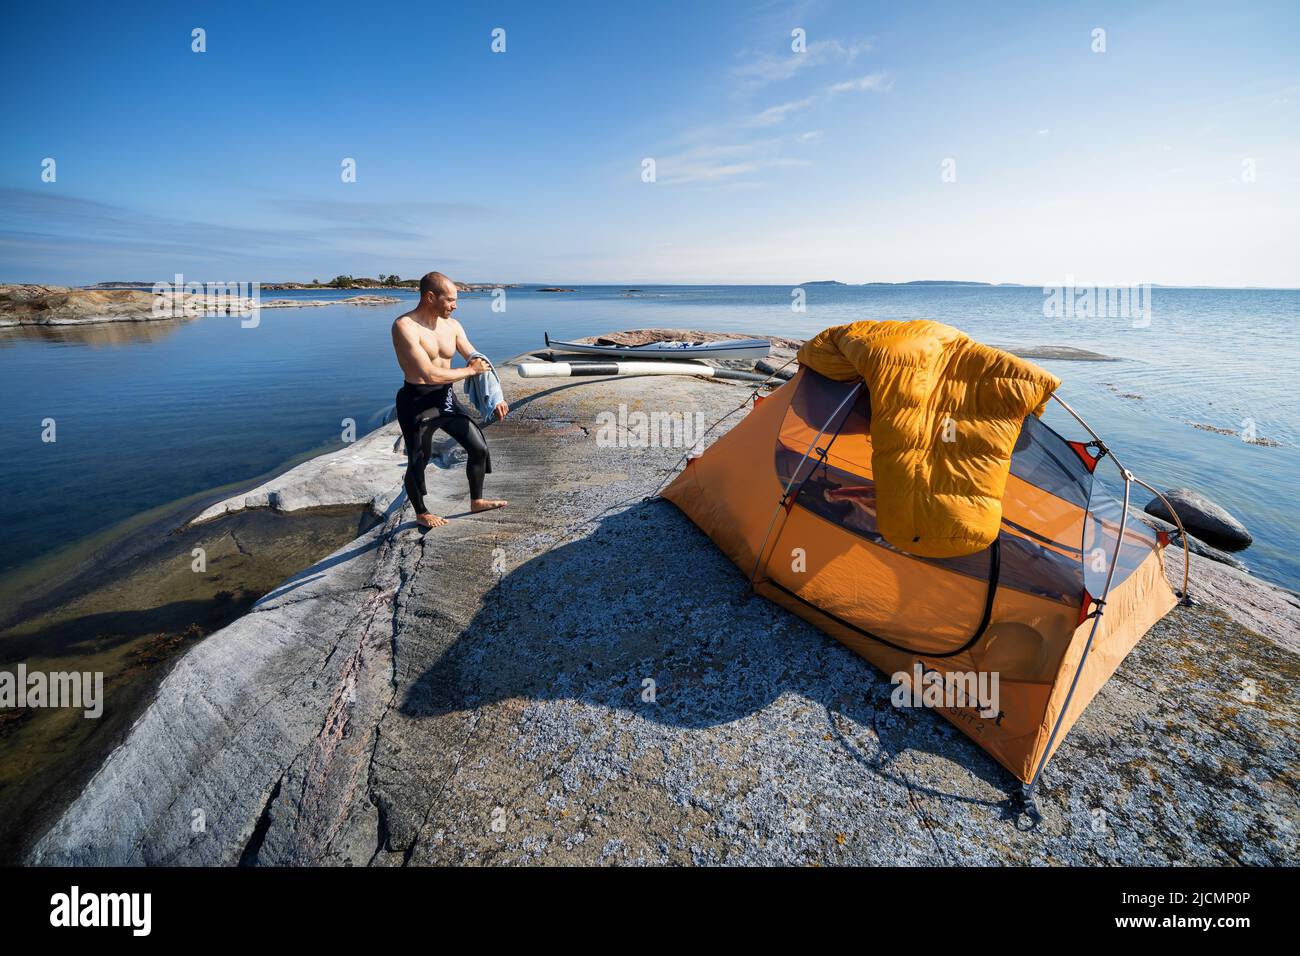 Getting ready for open water swimming at Skagsgadden island, Parainen, Finland Stock Photo